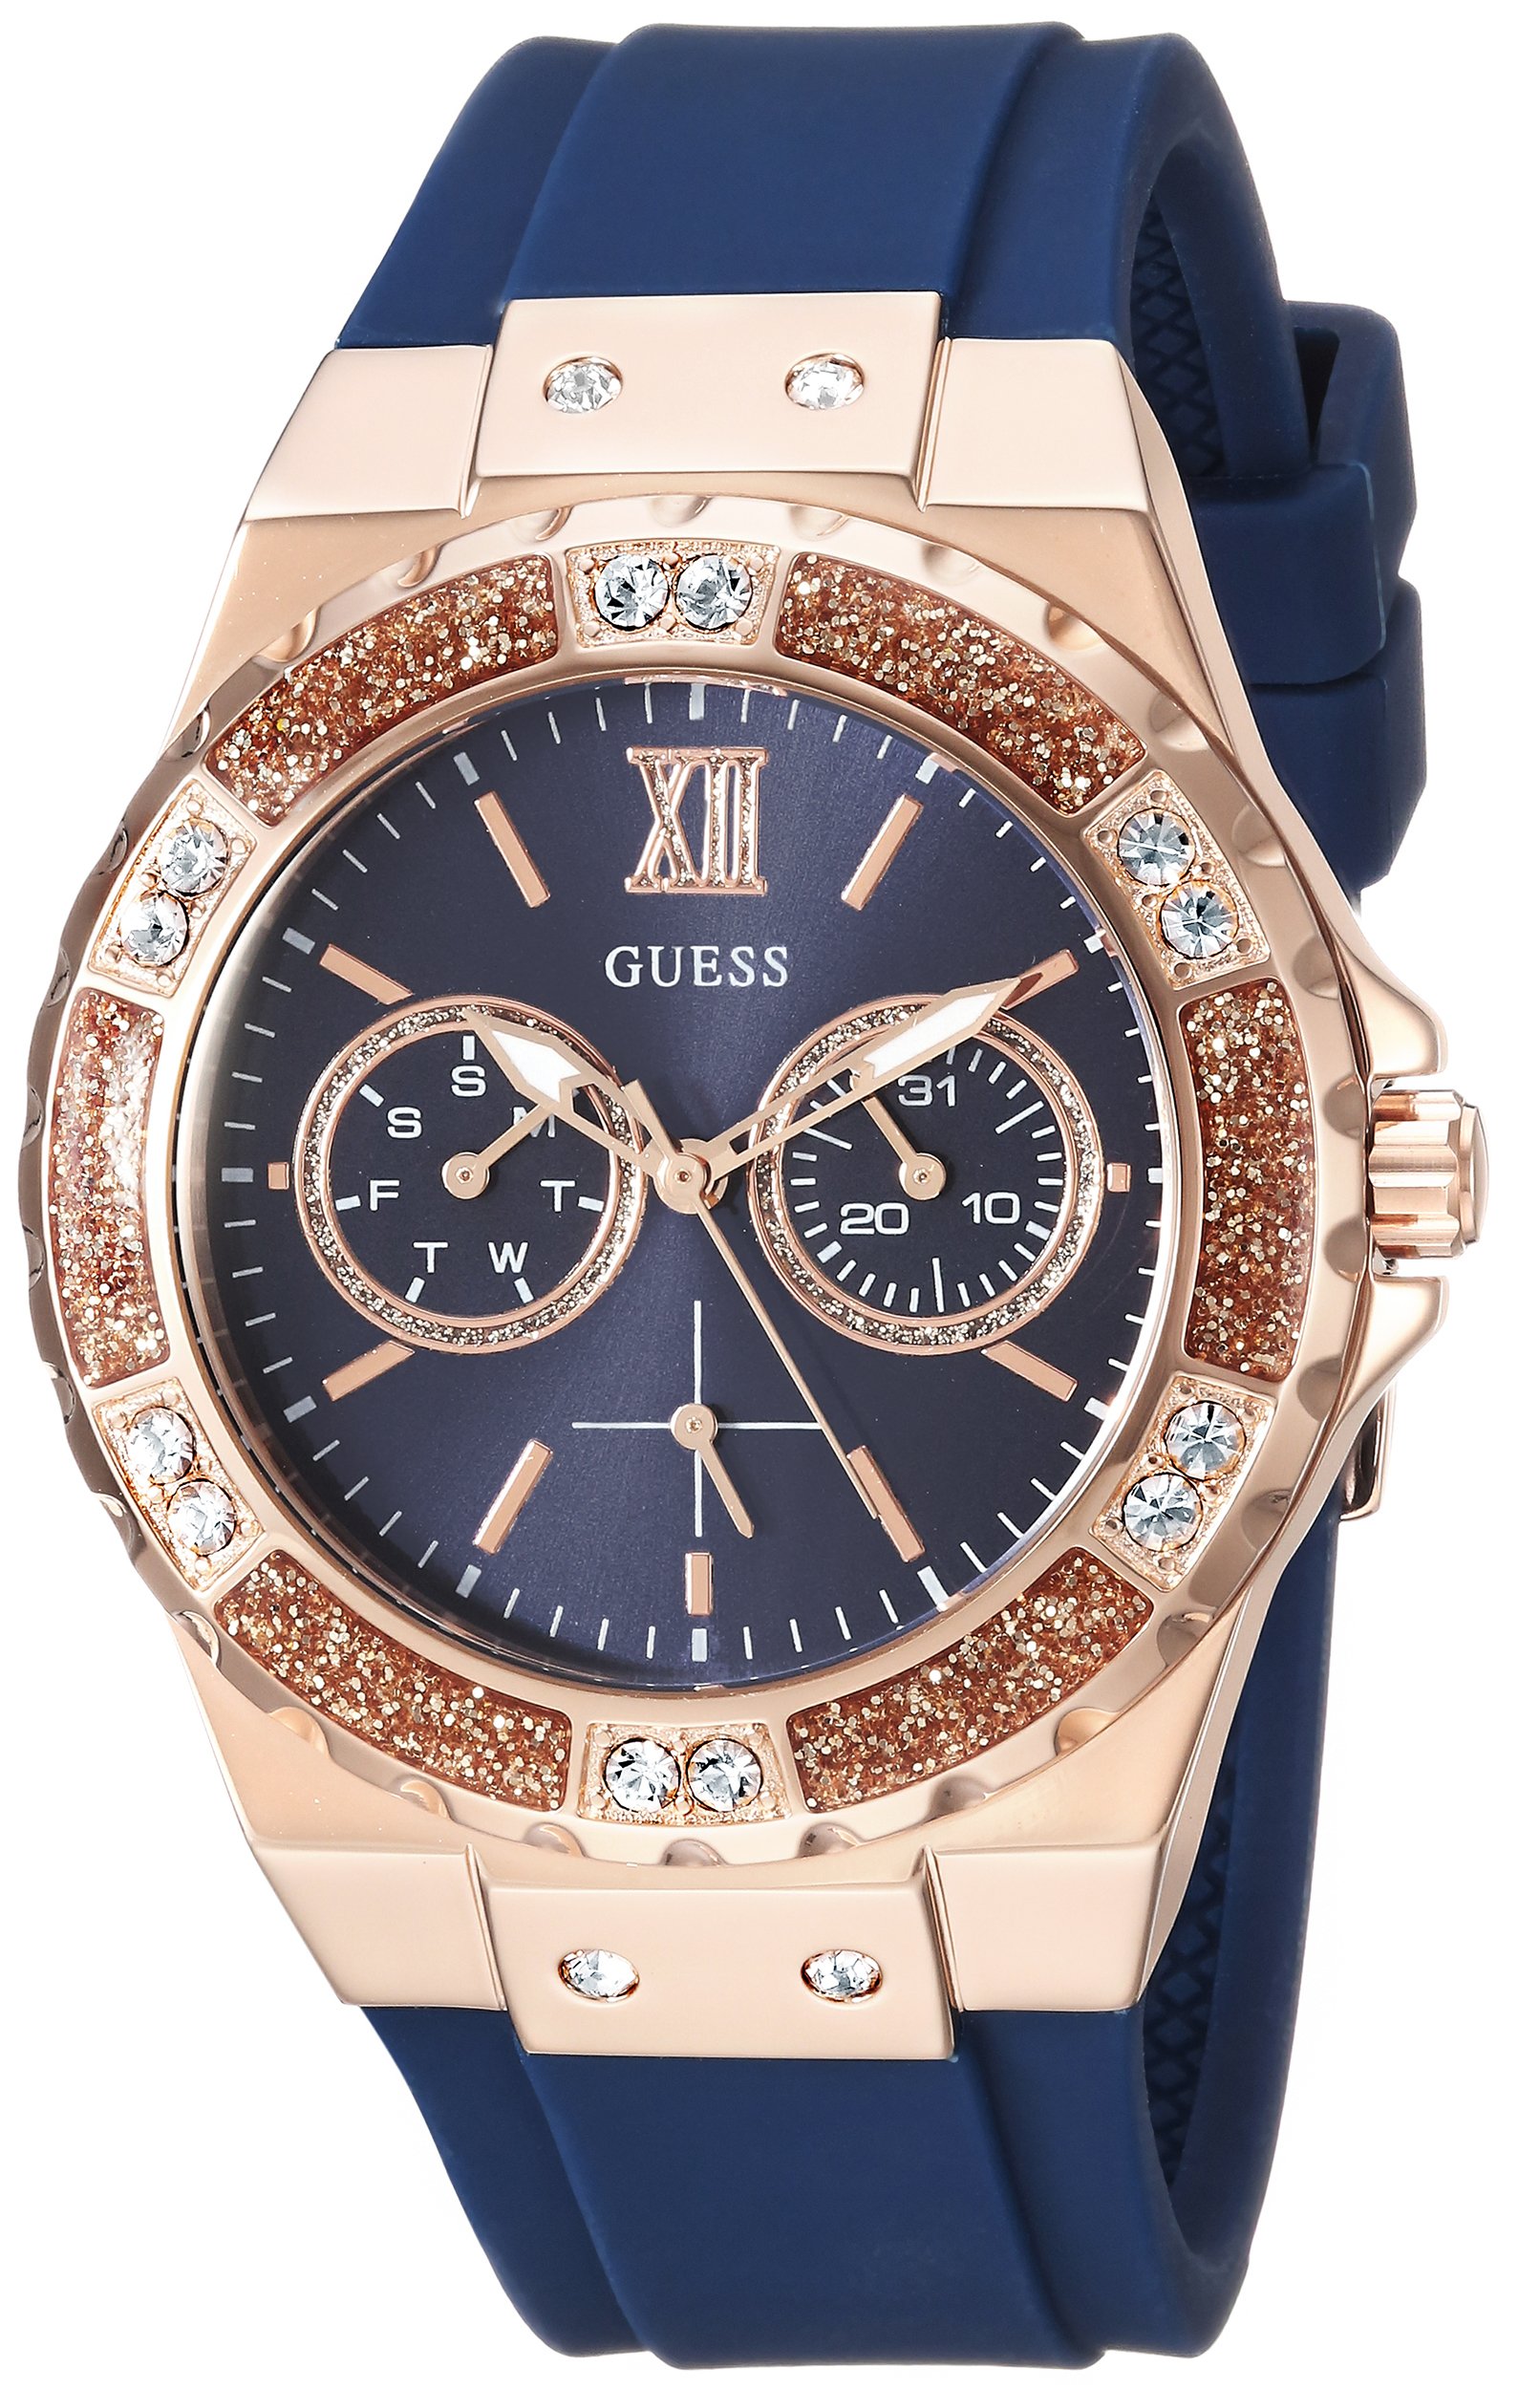 GUESS Women's Stainless Steel + Stain Resistant Silicone Watch with Day + Date Functions